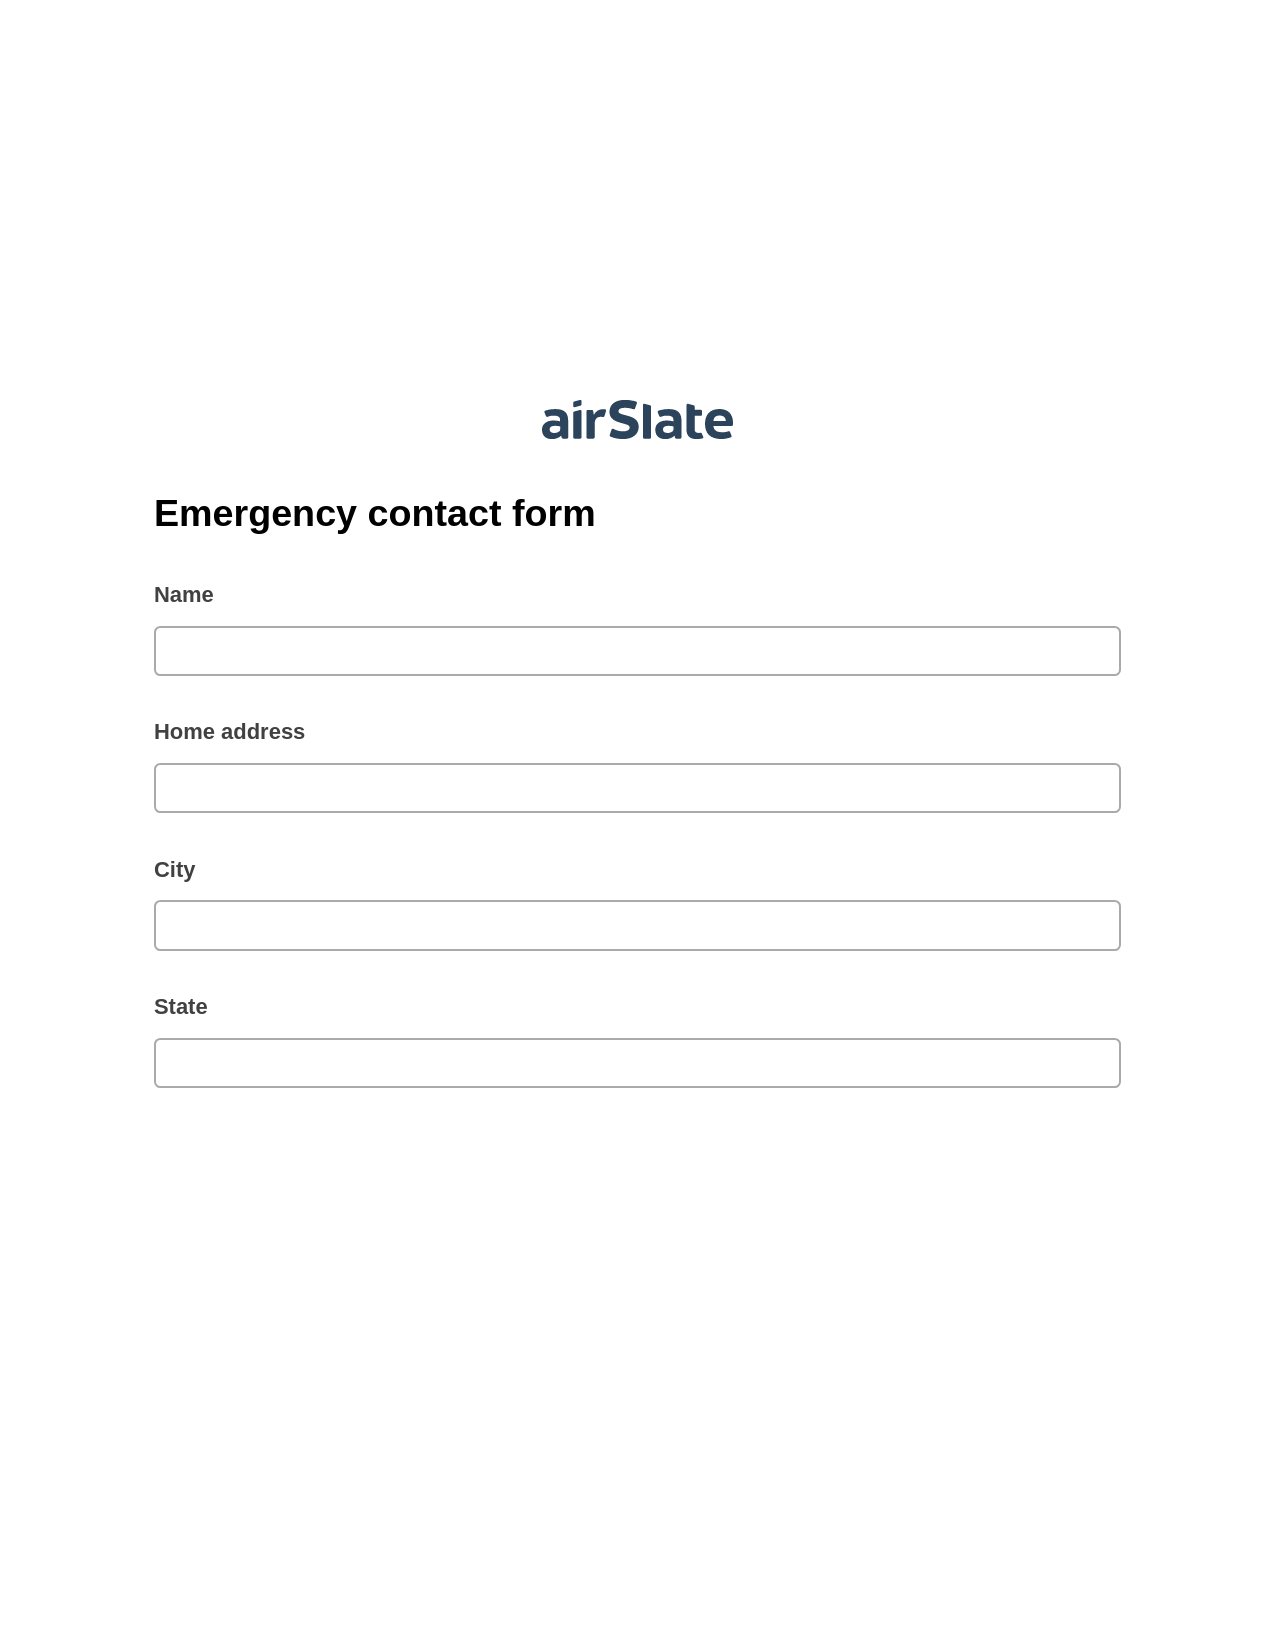 Multirole Emergency contact form Pre-fill from Google Sheet Dropdown Options Bot, Update NetSuite Records Bot, Box Bot